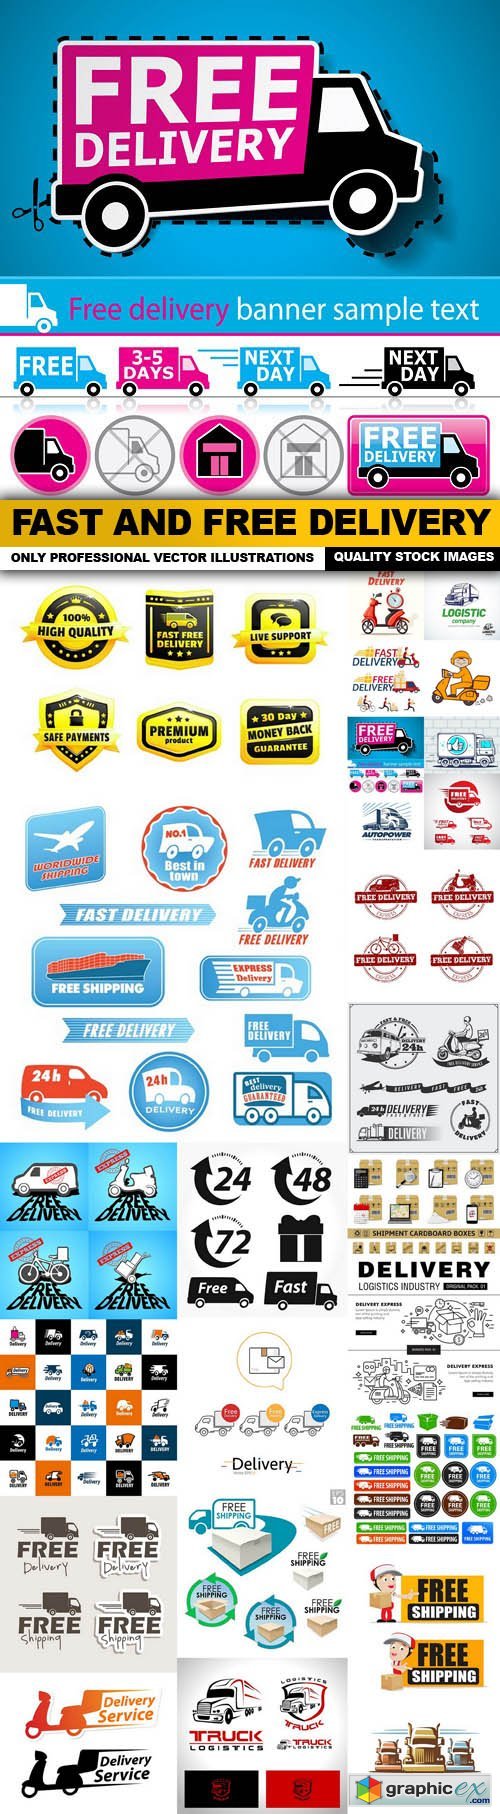 Fast And Free Delivery - 25 Vector